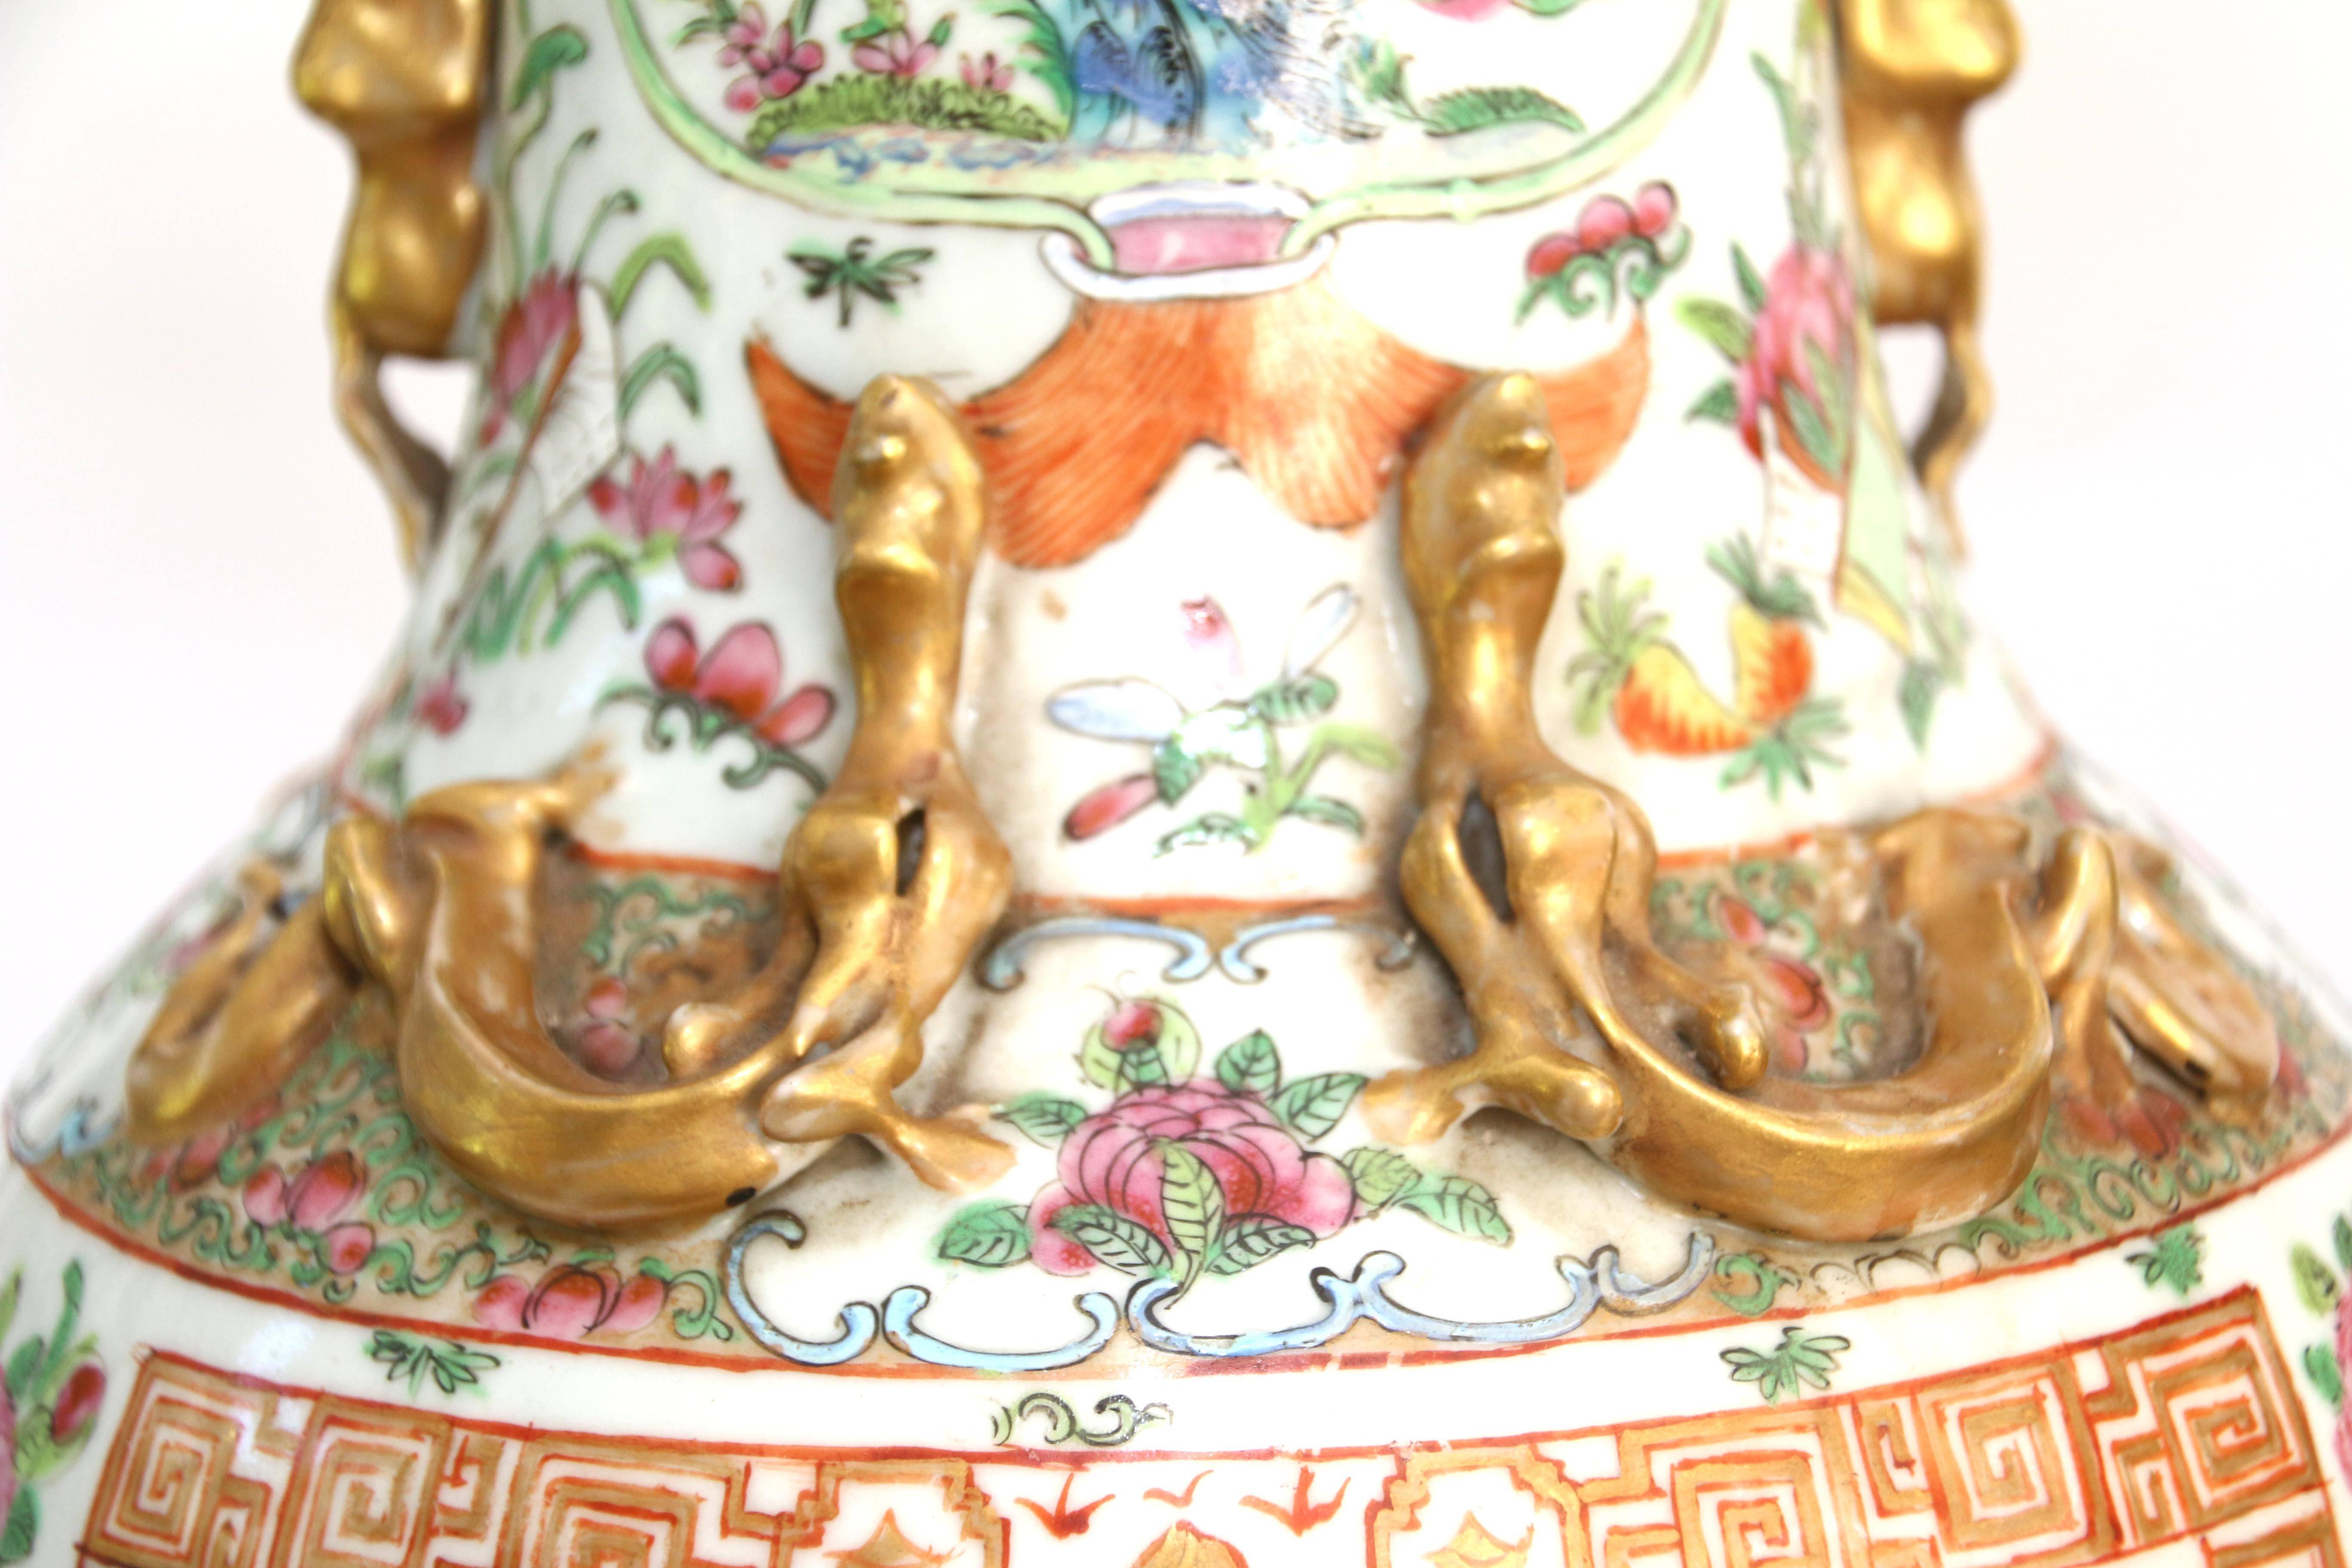 Pair of rose mandarin porcelain vases, China, 19th century, baluster form, with applied gilded foo dogs and dragons to neck and shoulders, and all-over decoration of polychrome enamel medallions with figural scenes and flowers and butterflies,